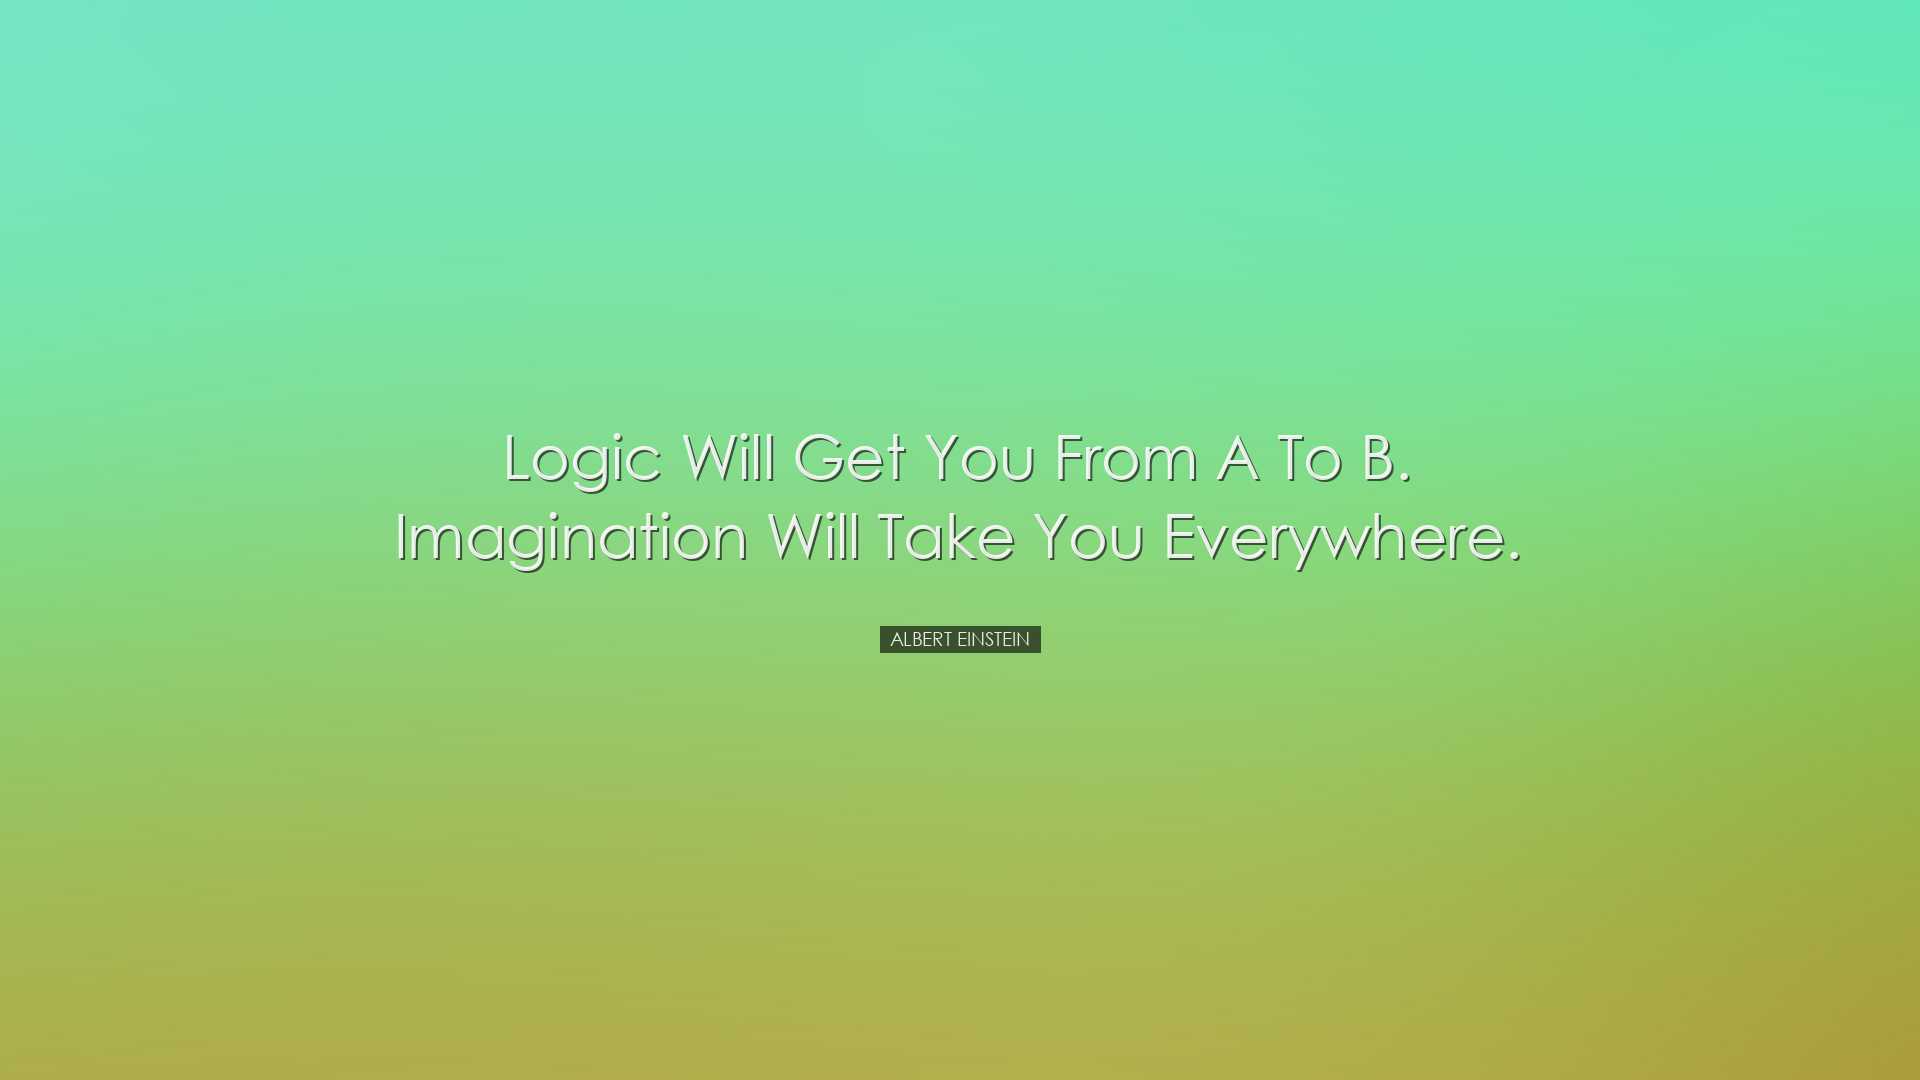 Logic will get you from A to B. Imagination will take you everywhe